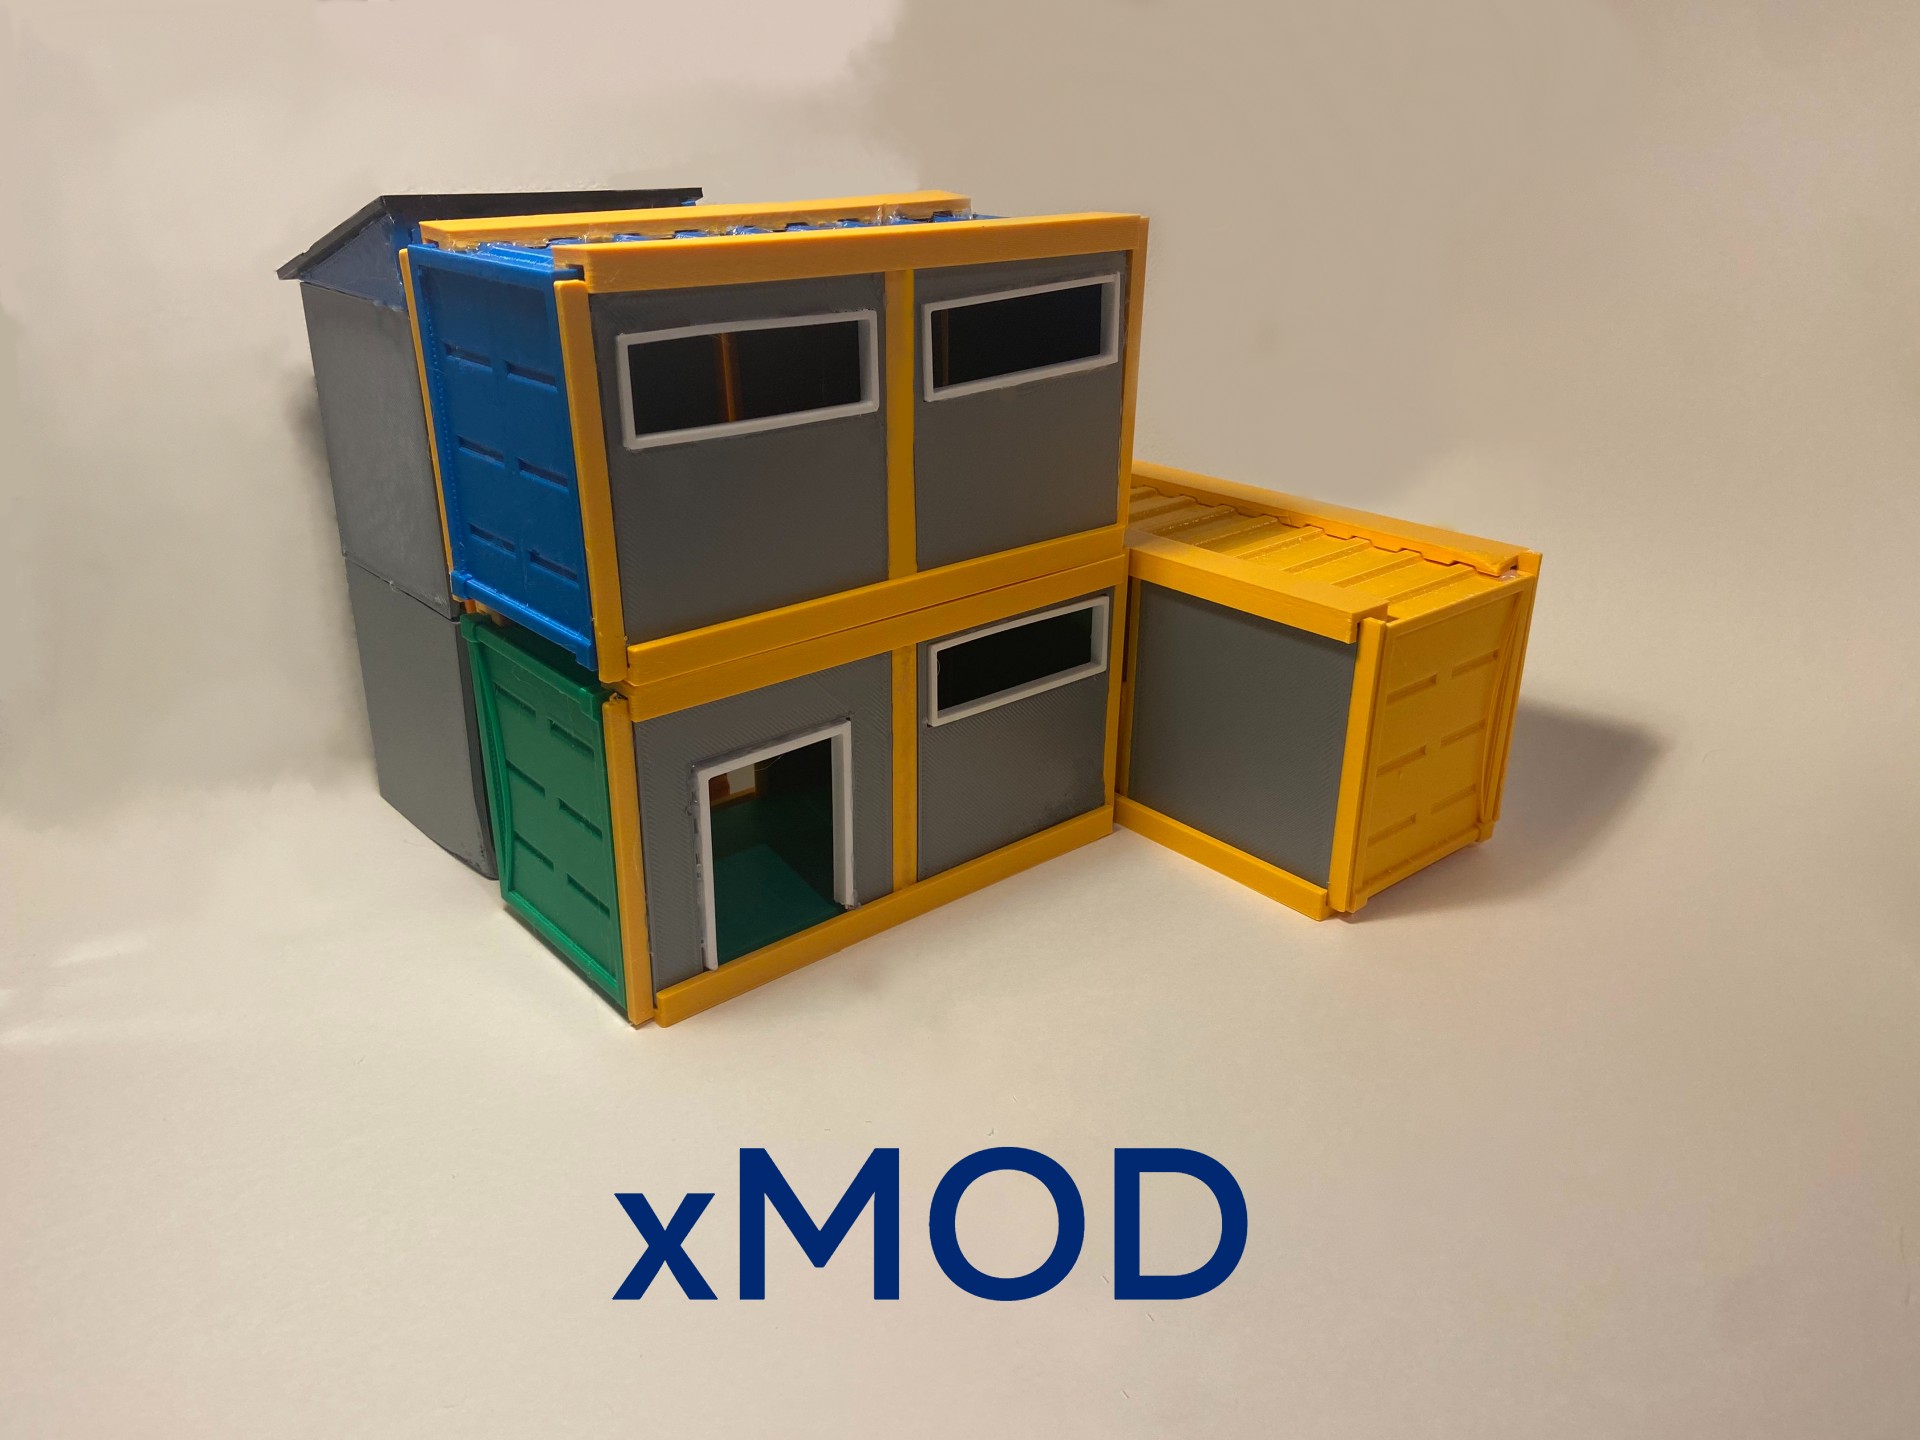 xMOD - An Affordable, Modular, and Sustainable Alternative to Traditional Housing